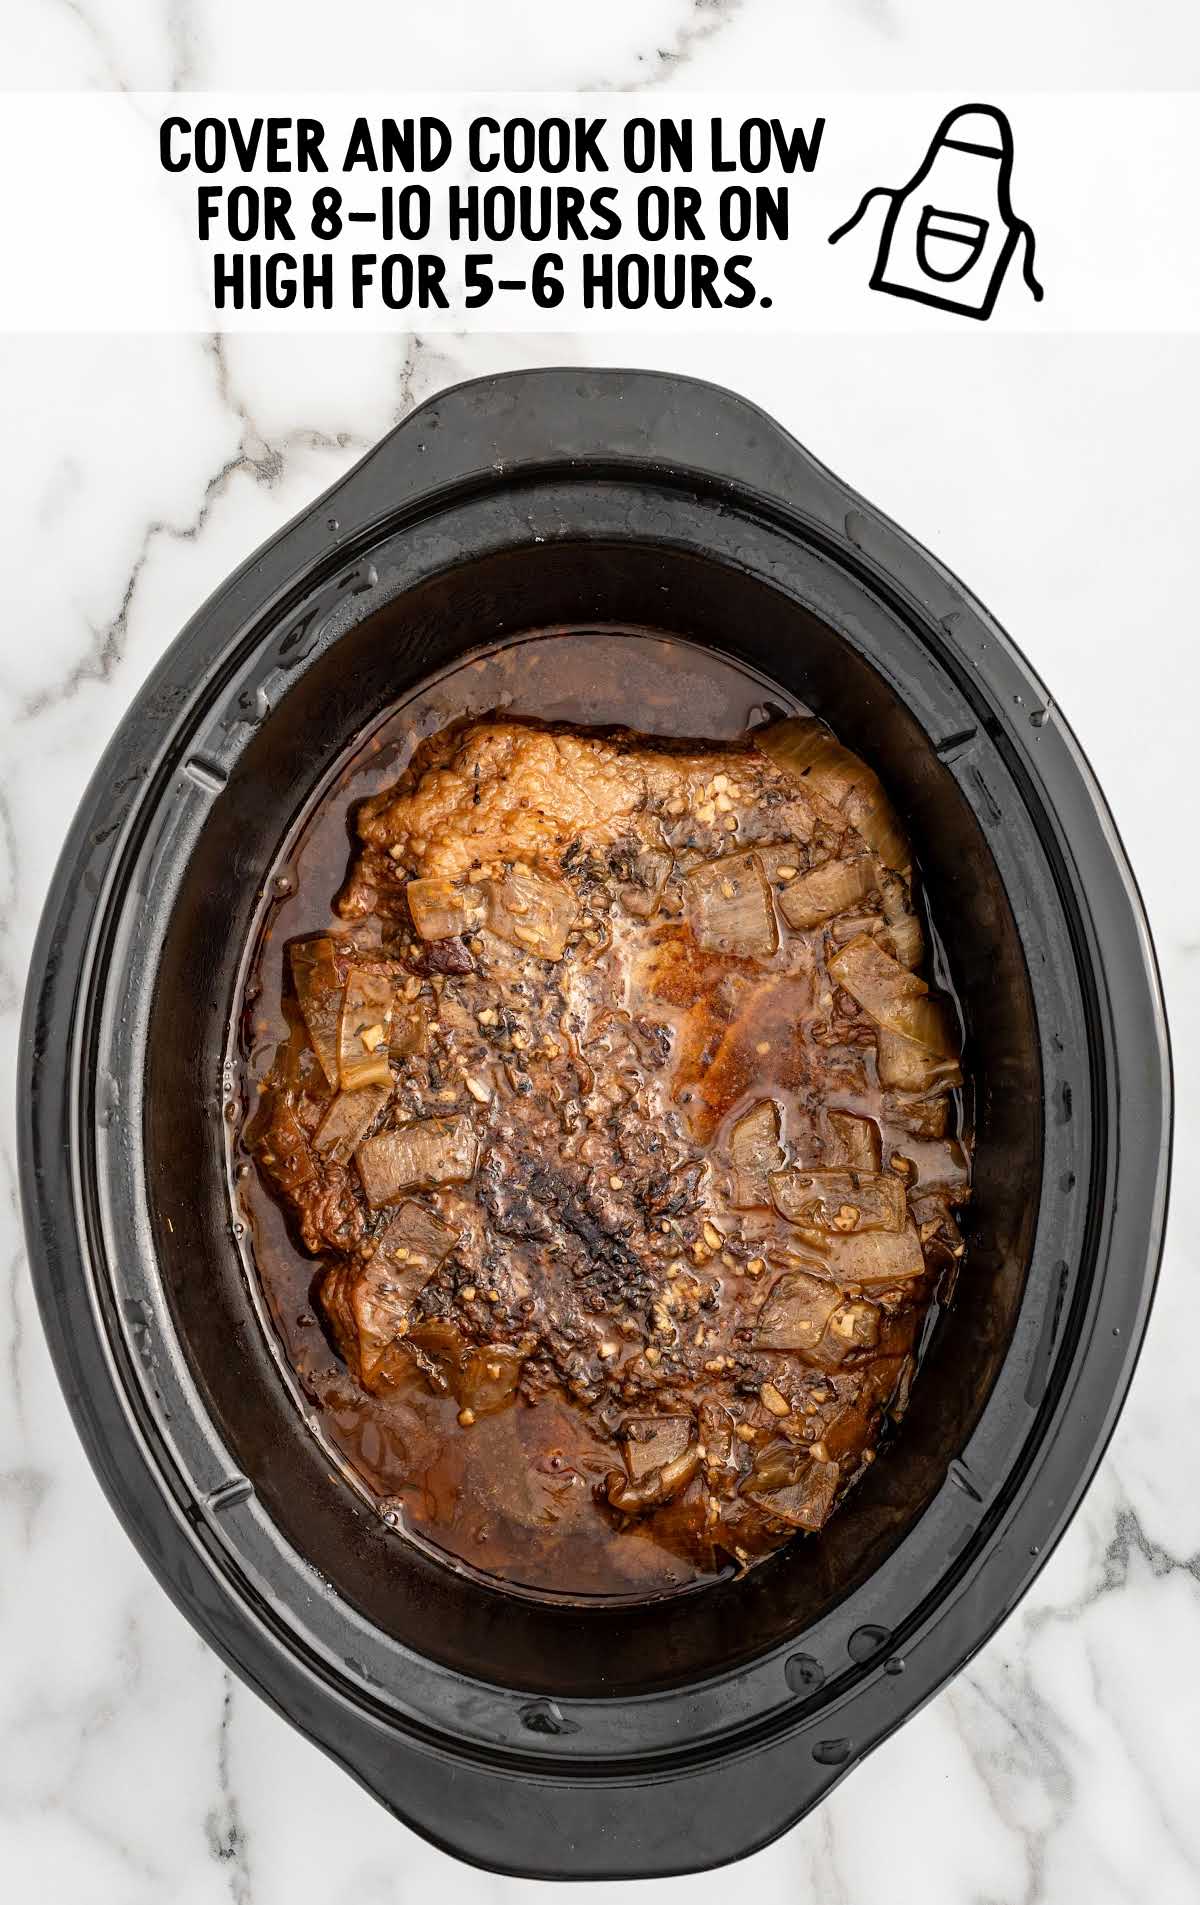 brisket covered and cooked in a slow cooker